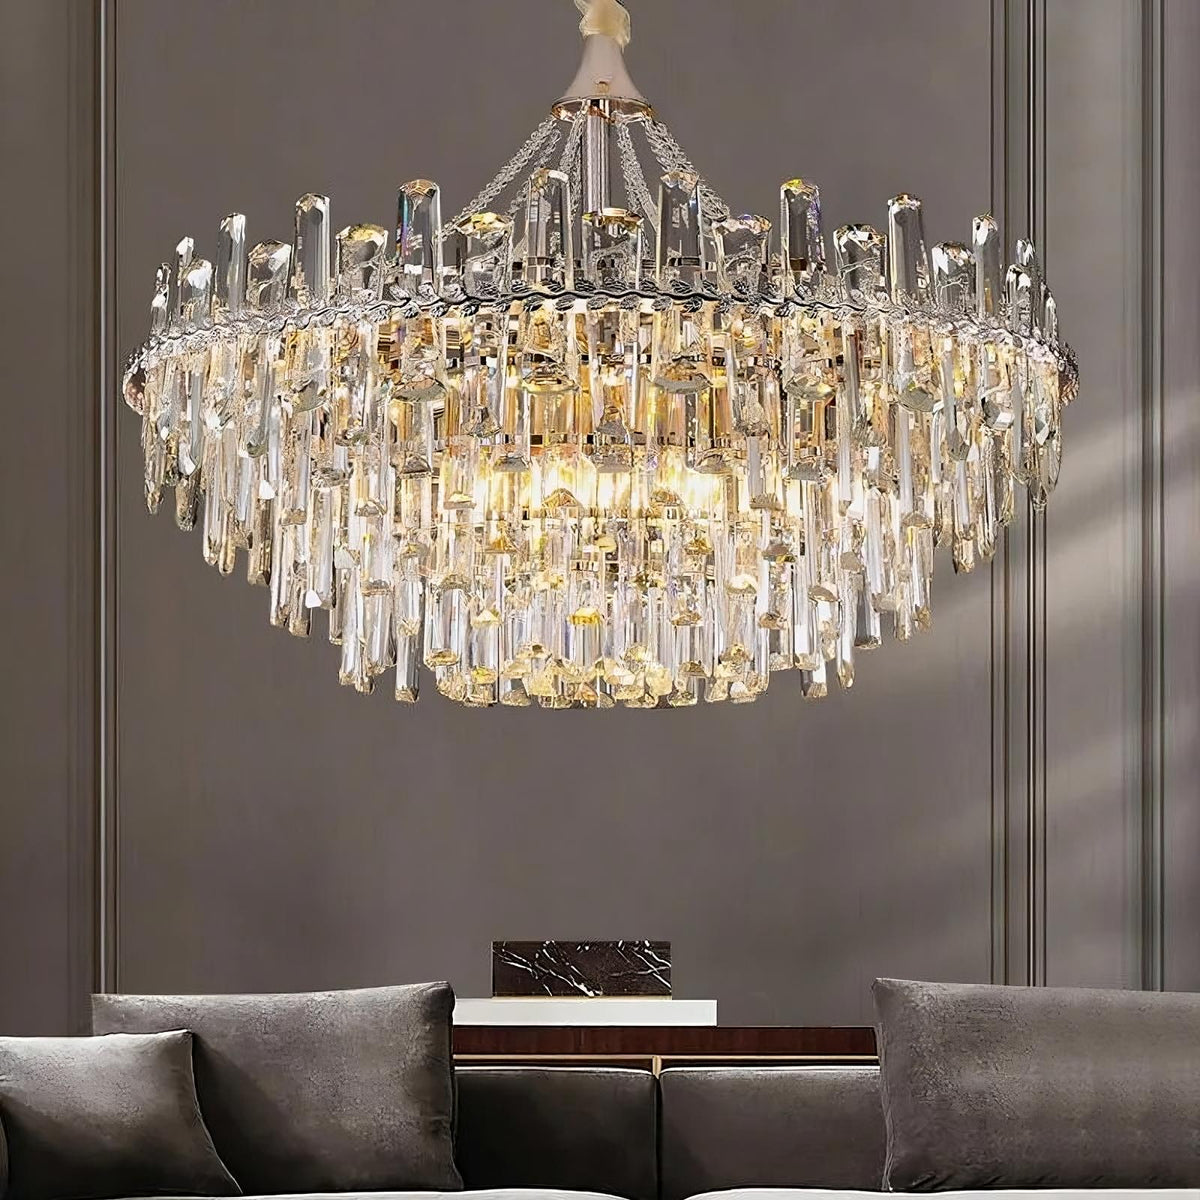 An elegant, contemporary Gio Crystal Modern Chandelier by Morsale.com hangs from the ceiling, featuring numerous handmade crystals that refract light beautifully. Below, a modern sofa with plush gray cushions contrasts against a backdrop of subtly paneled grey walls.